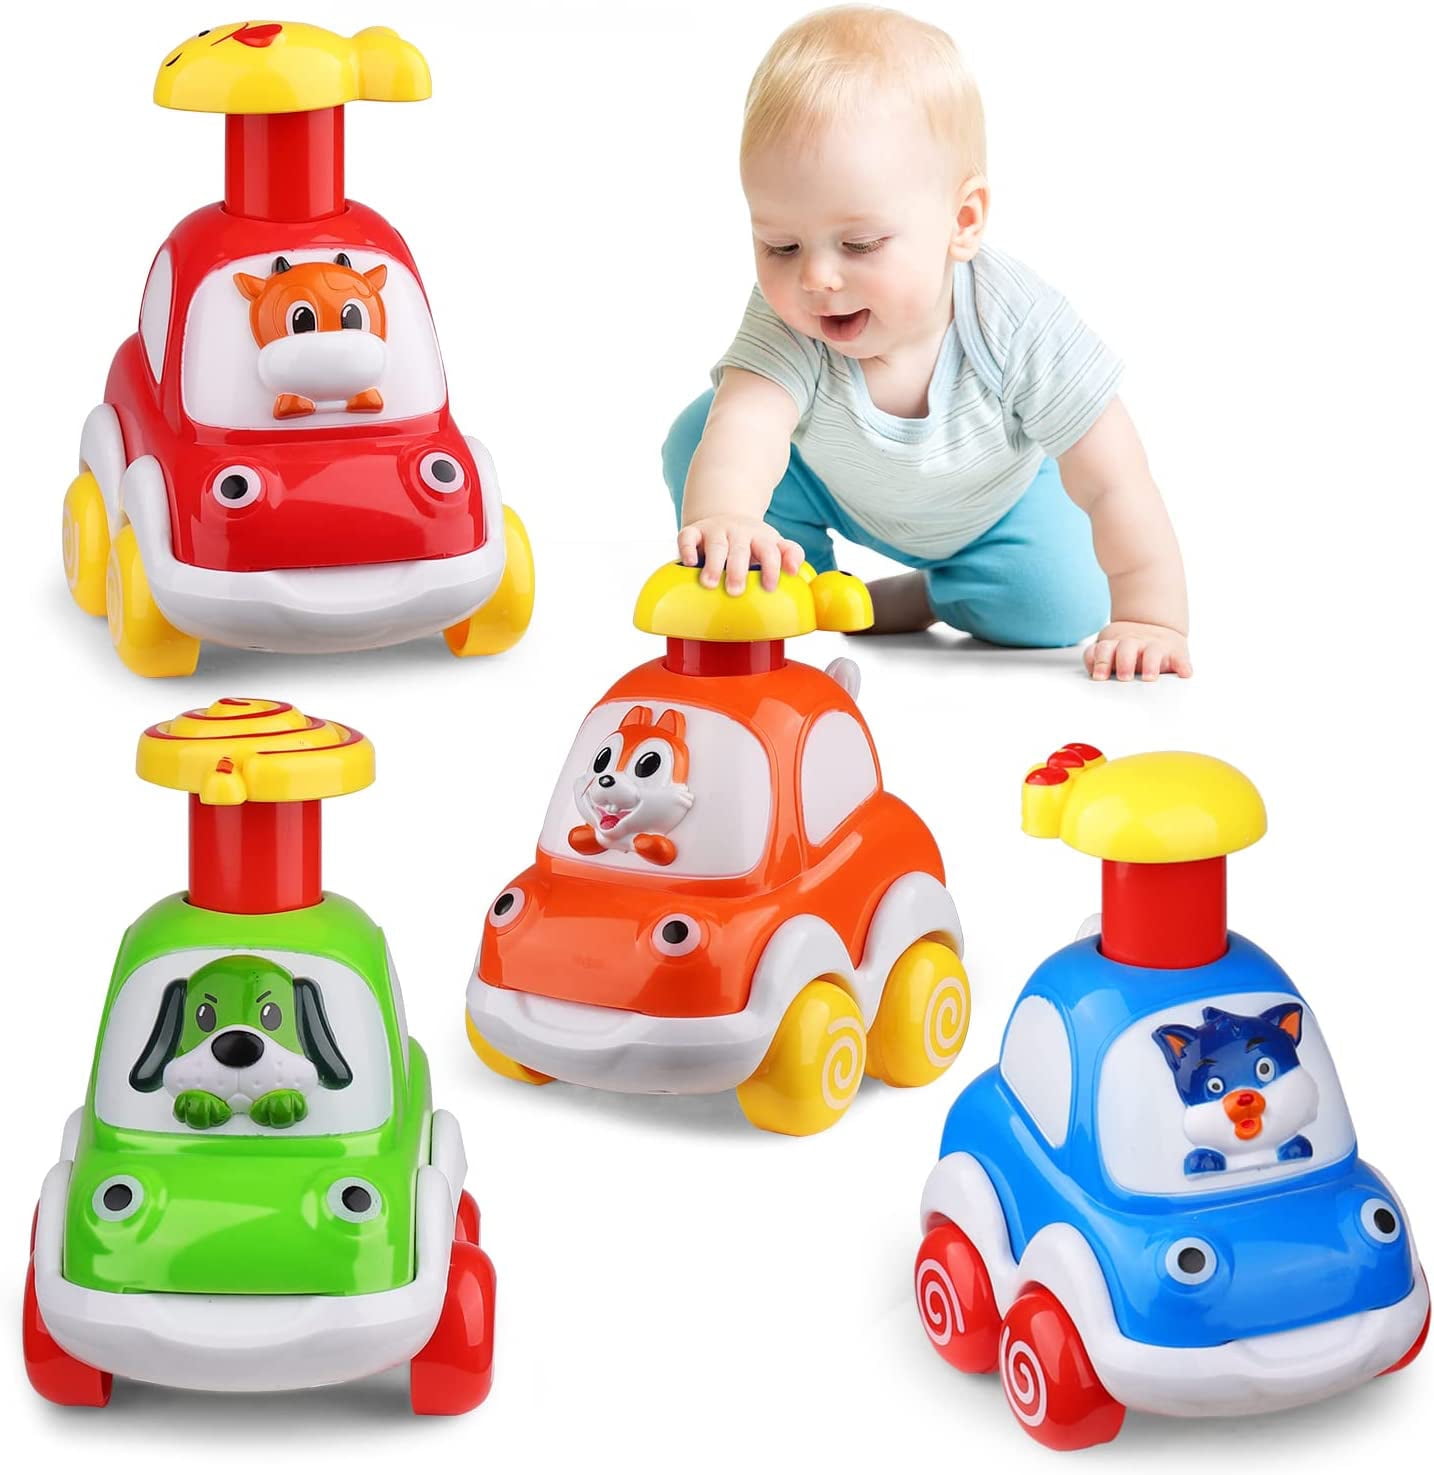 Wqf Wqfhk054 Toddler Animal Car Toys For 1 2 3 Year Old Boys Press And Go Cartoon Truck Educational